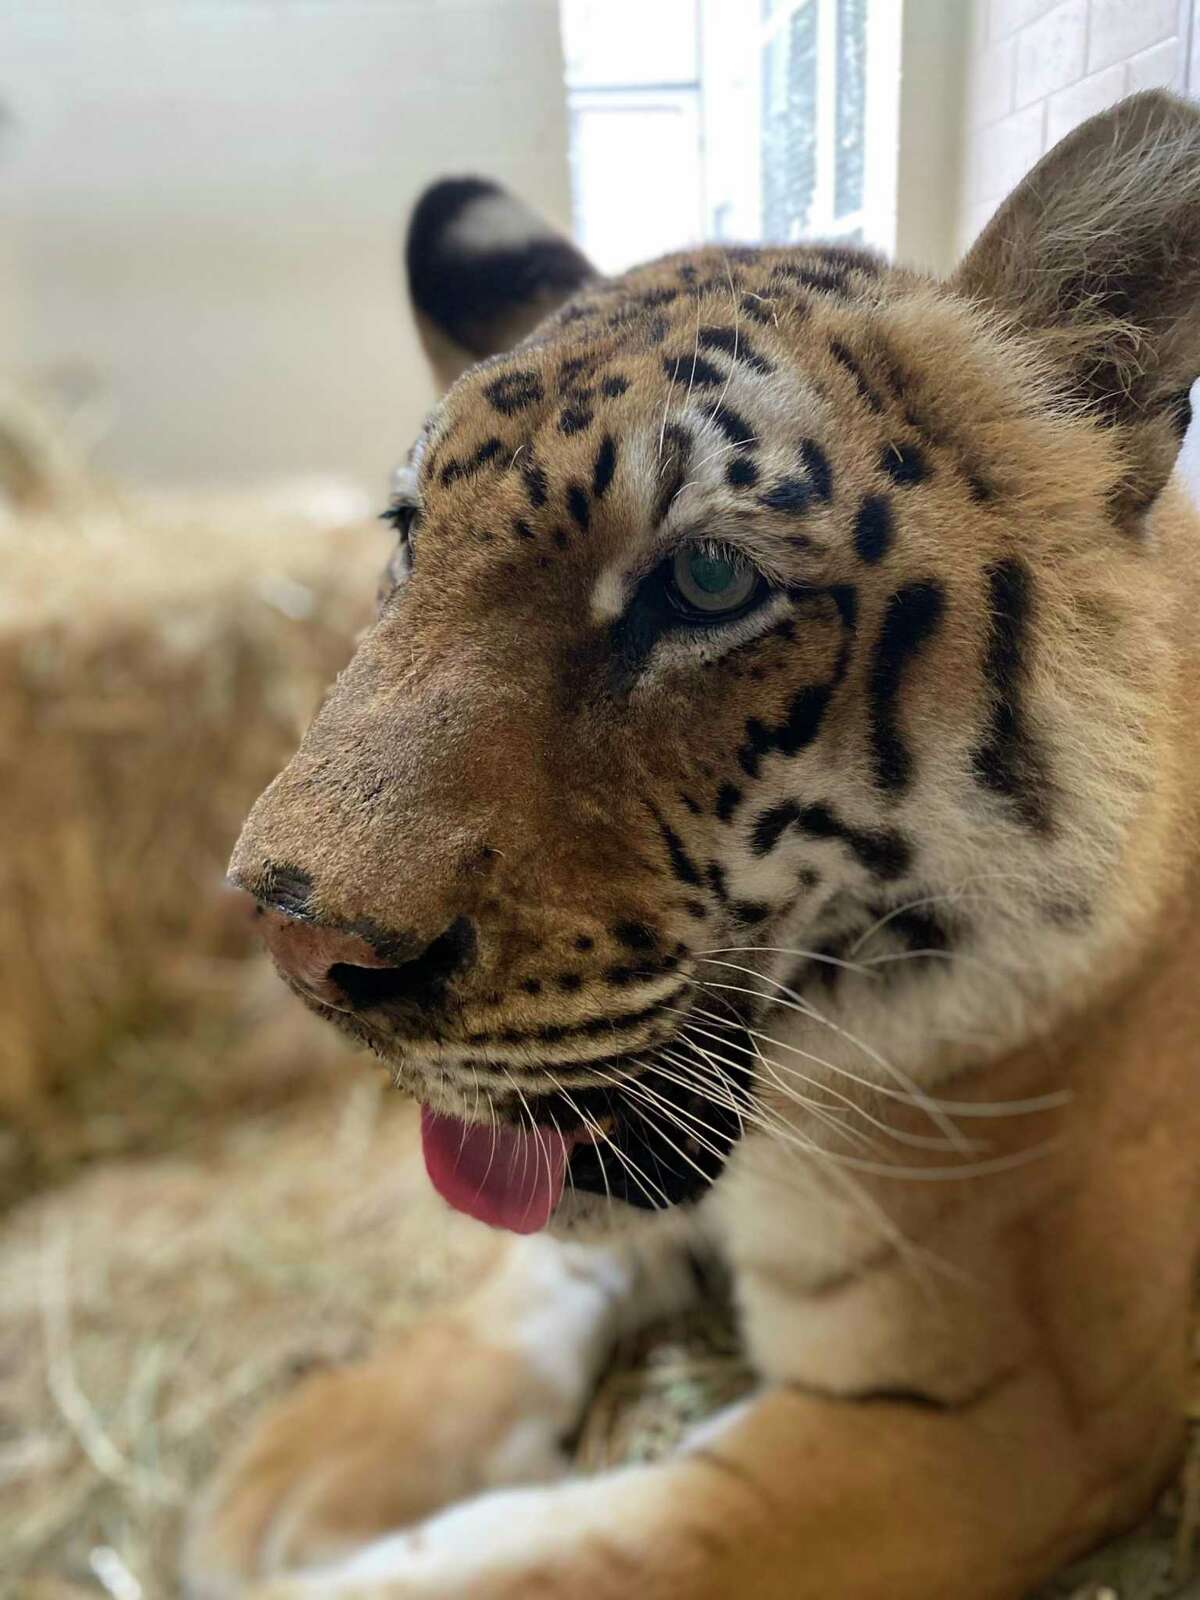 Lola is one of the tigers rescued by the Oakland Zoo.